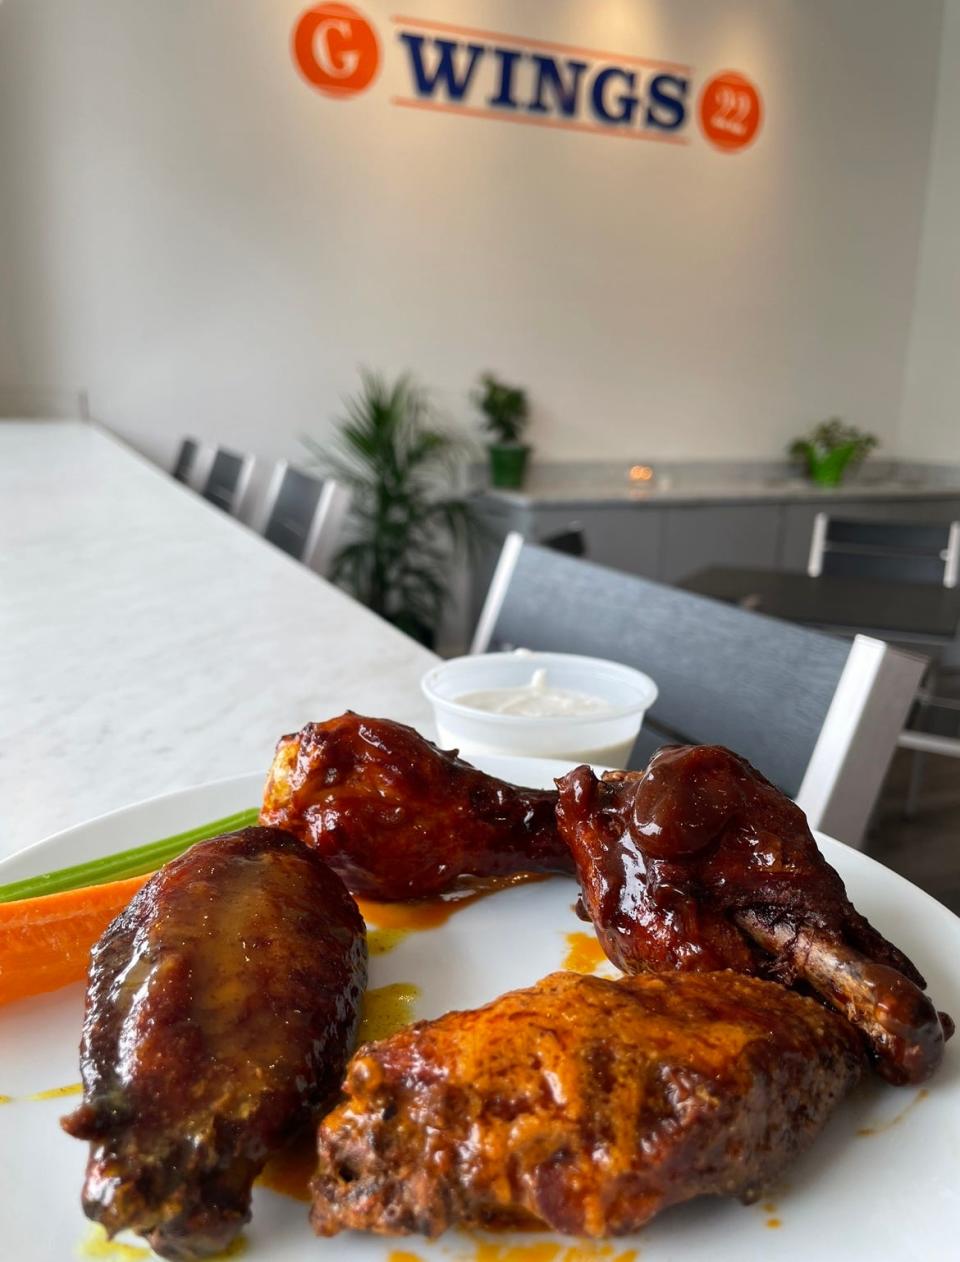 Wings from G Wings 22 in West Long Branch come in four different flavors: Buffalo (clockwise from front), honey mustard, honey sriracha and barbecue.